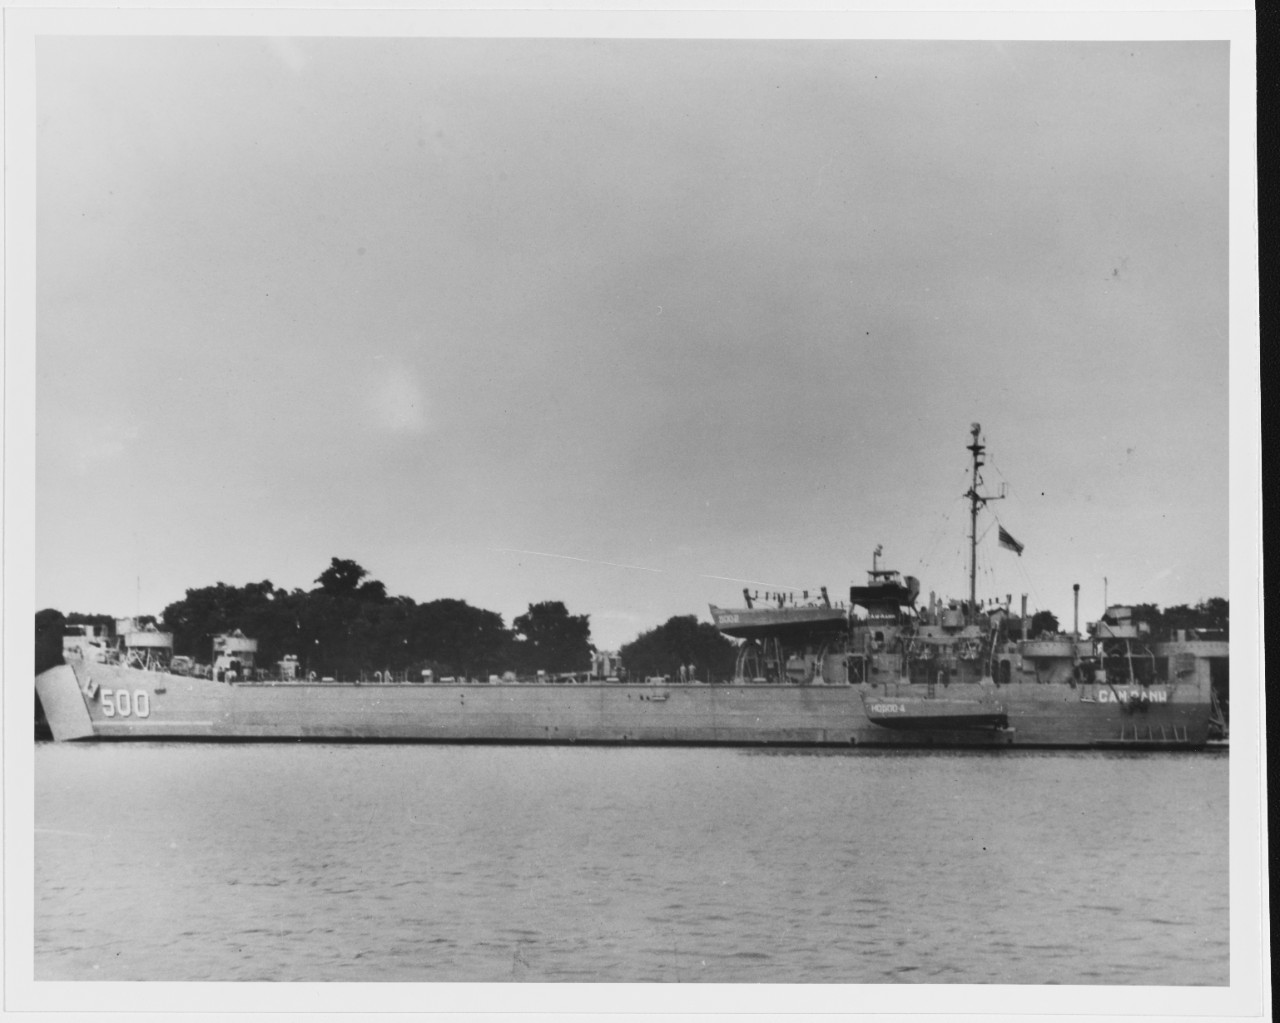 CAM RANH (HQ-500) (South Vietnamese LST, ex-USS MARION COUNTY, LST-975)